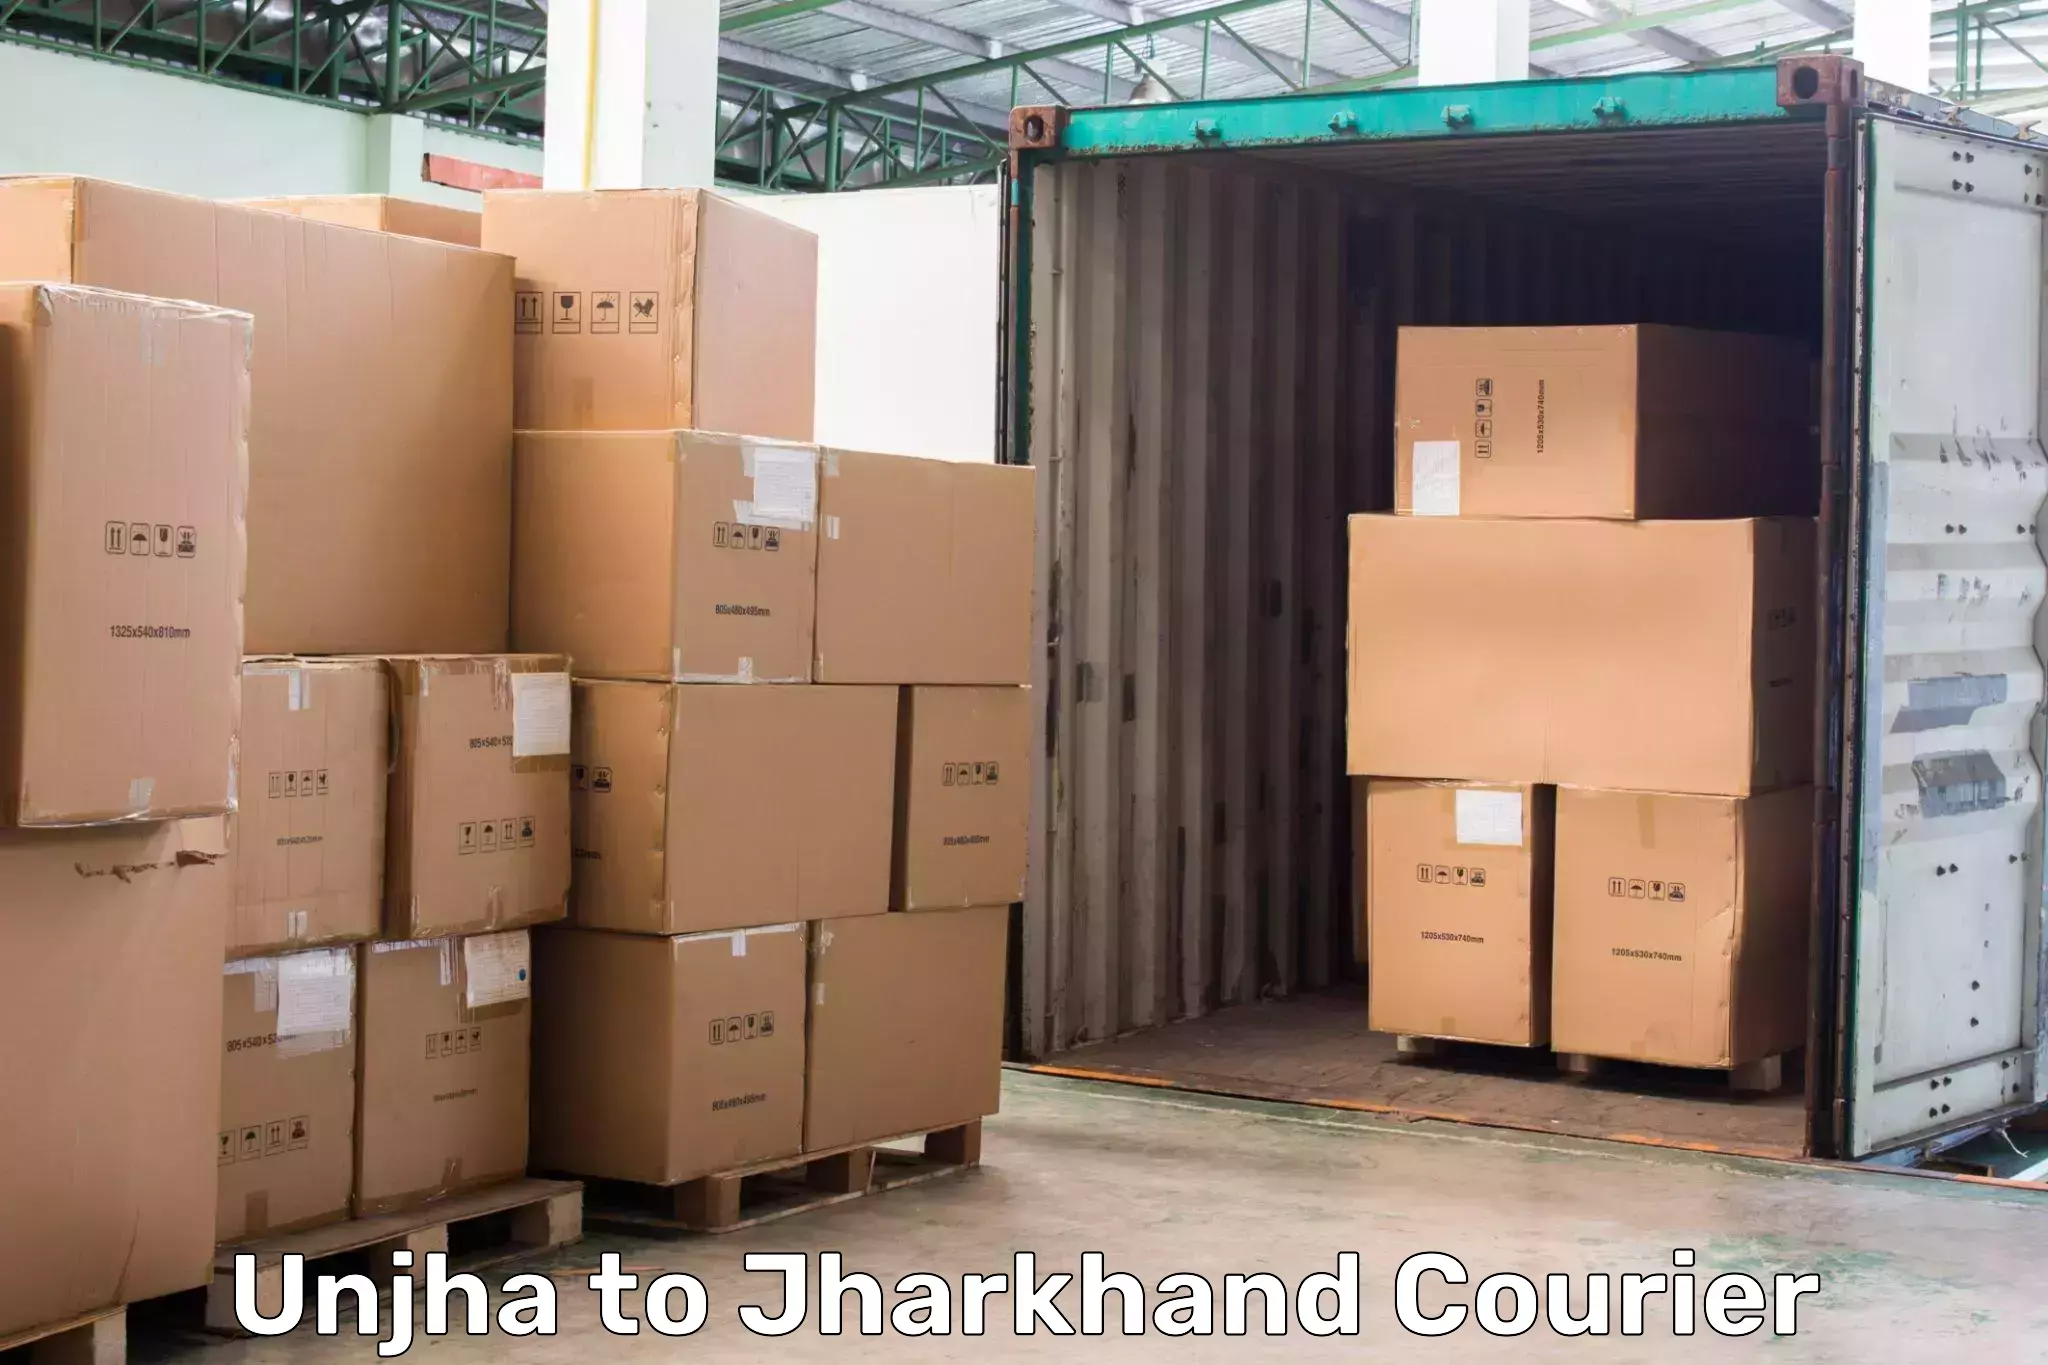 Courier service booking Unjha to Jamshedpur